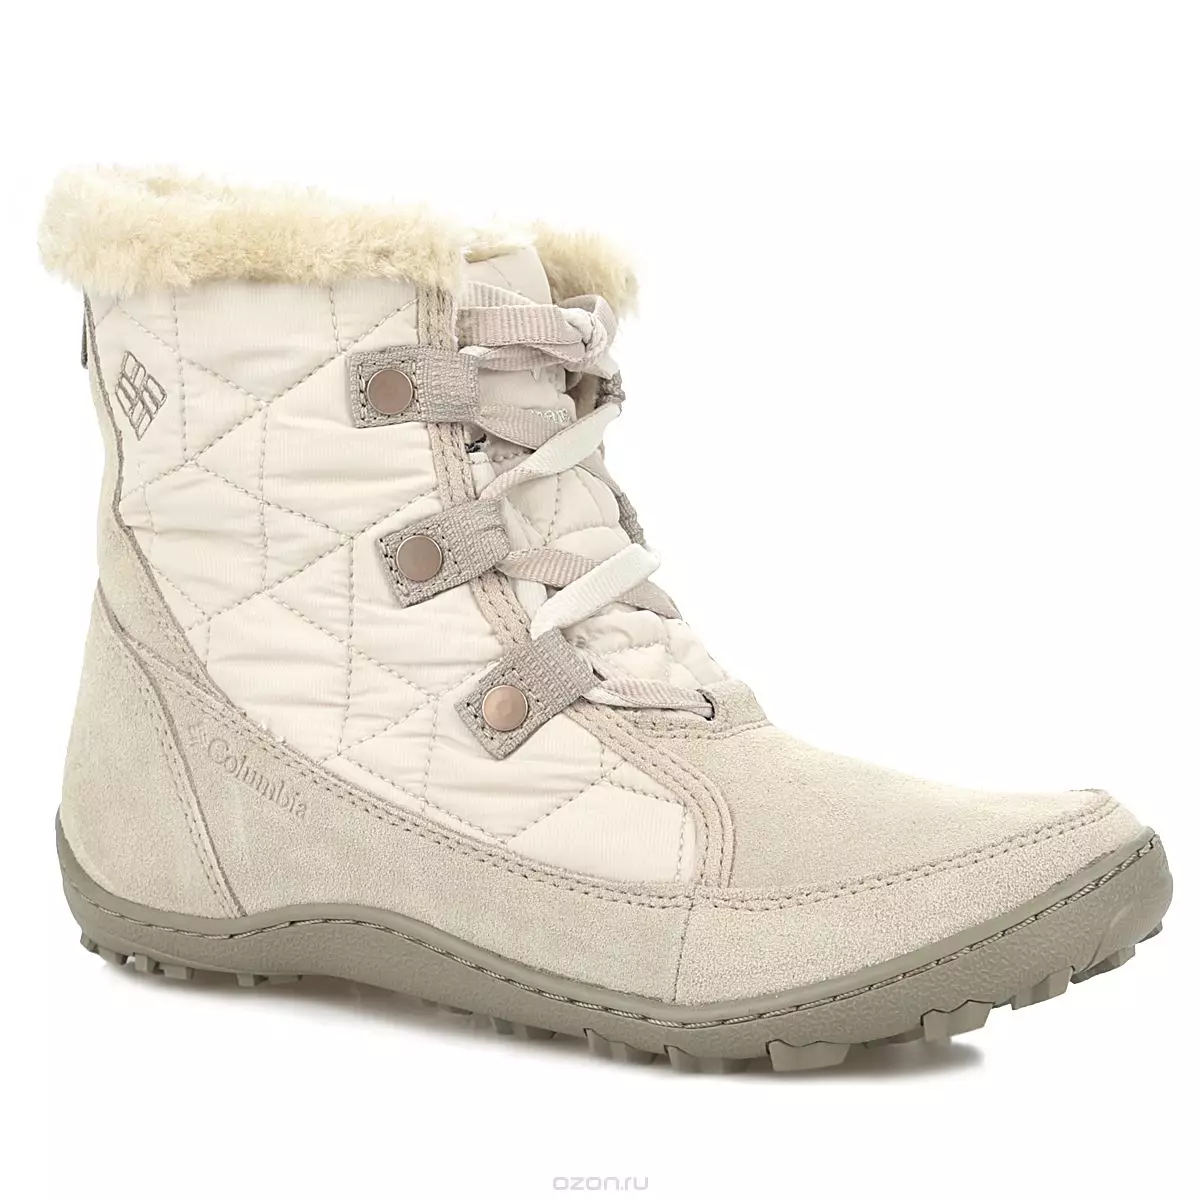 Kombia boots (64 photos): Women's winter and insulated children's models for girls Bugaboot and Minx, COLUMBIA reviews 2268_35